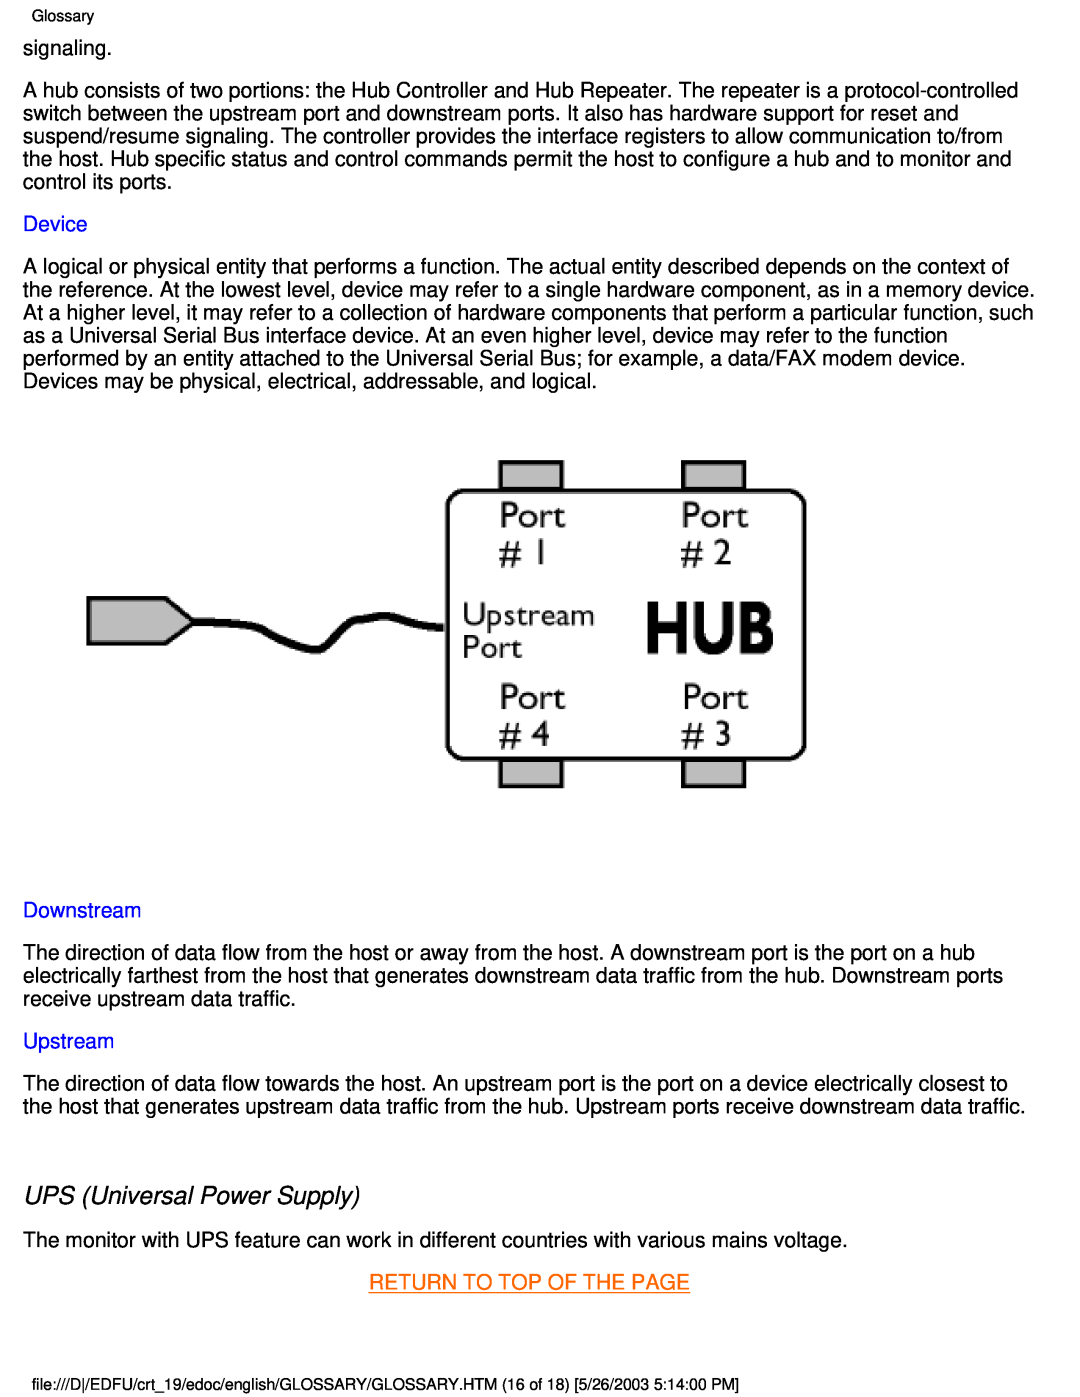 Philips 109E5 user manual UPS Universal Power Supply, Device, Downstream, Upstream, Return To Top Of The Page 